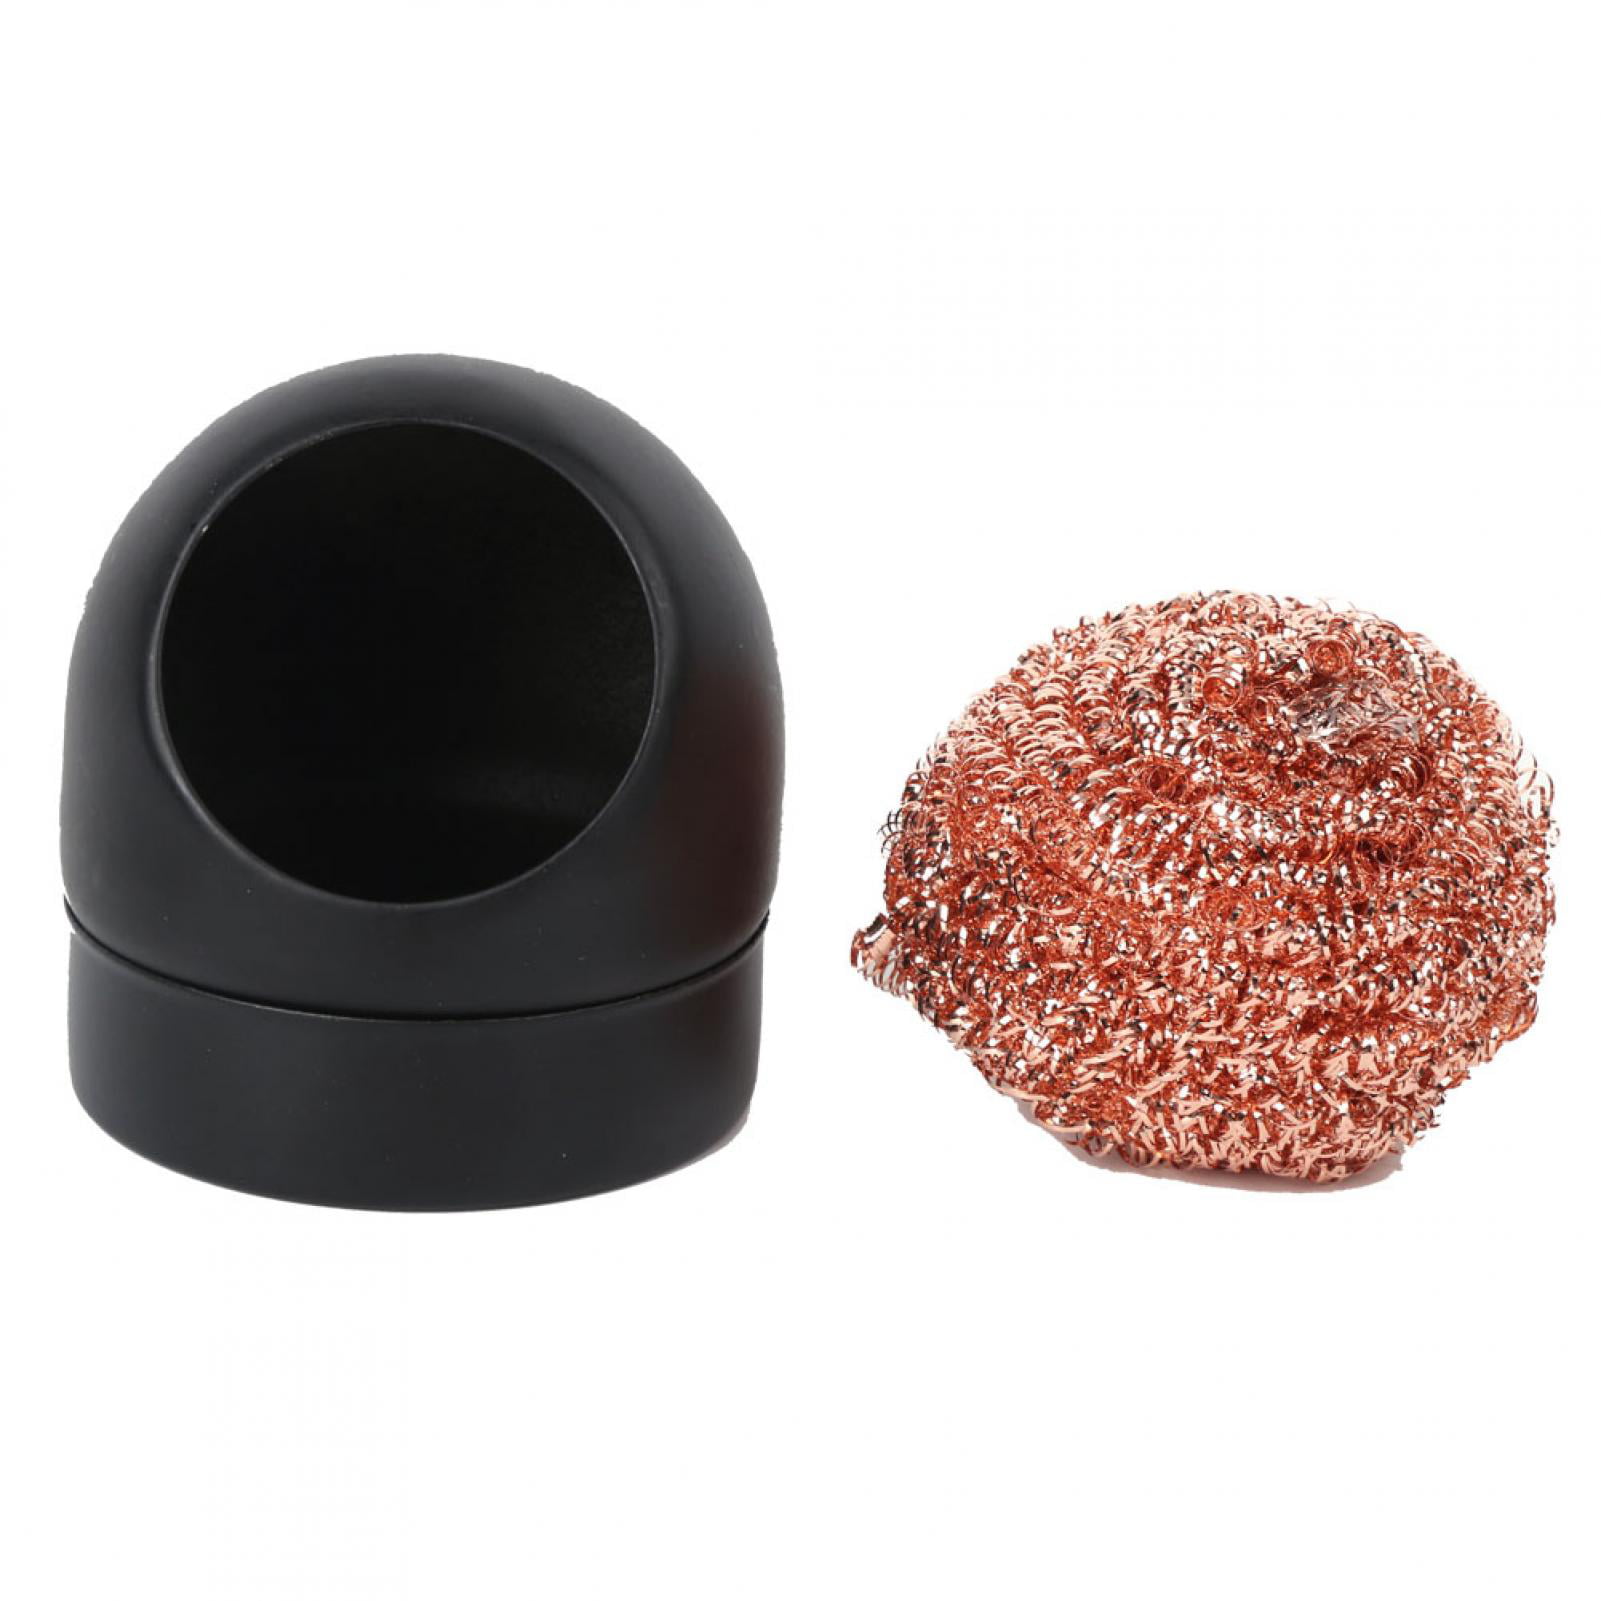 Soldering Iron Tip Cleaner Scourer Cleaning Ball Black Industrial Tool with Base 